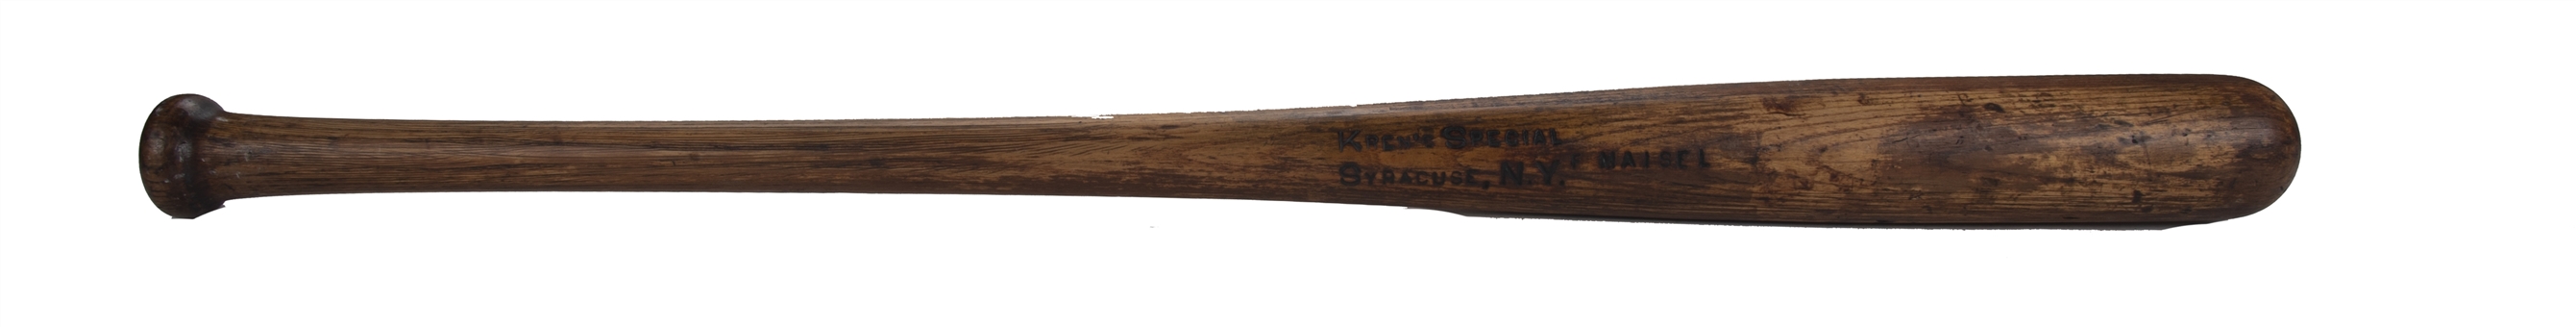 Circa 1916-1920 Fritz Maisel Game Used Krens Special Pro Model Bat (PSA/DNA)